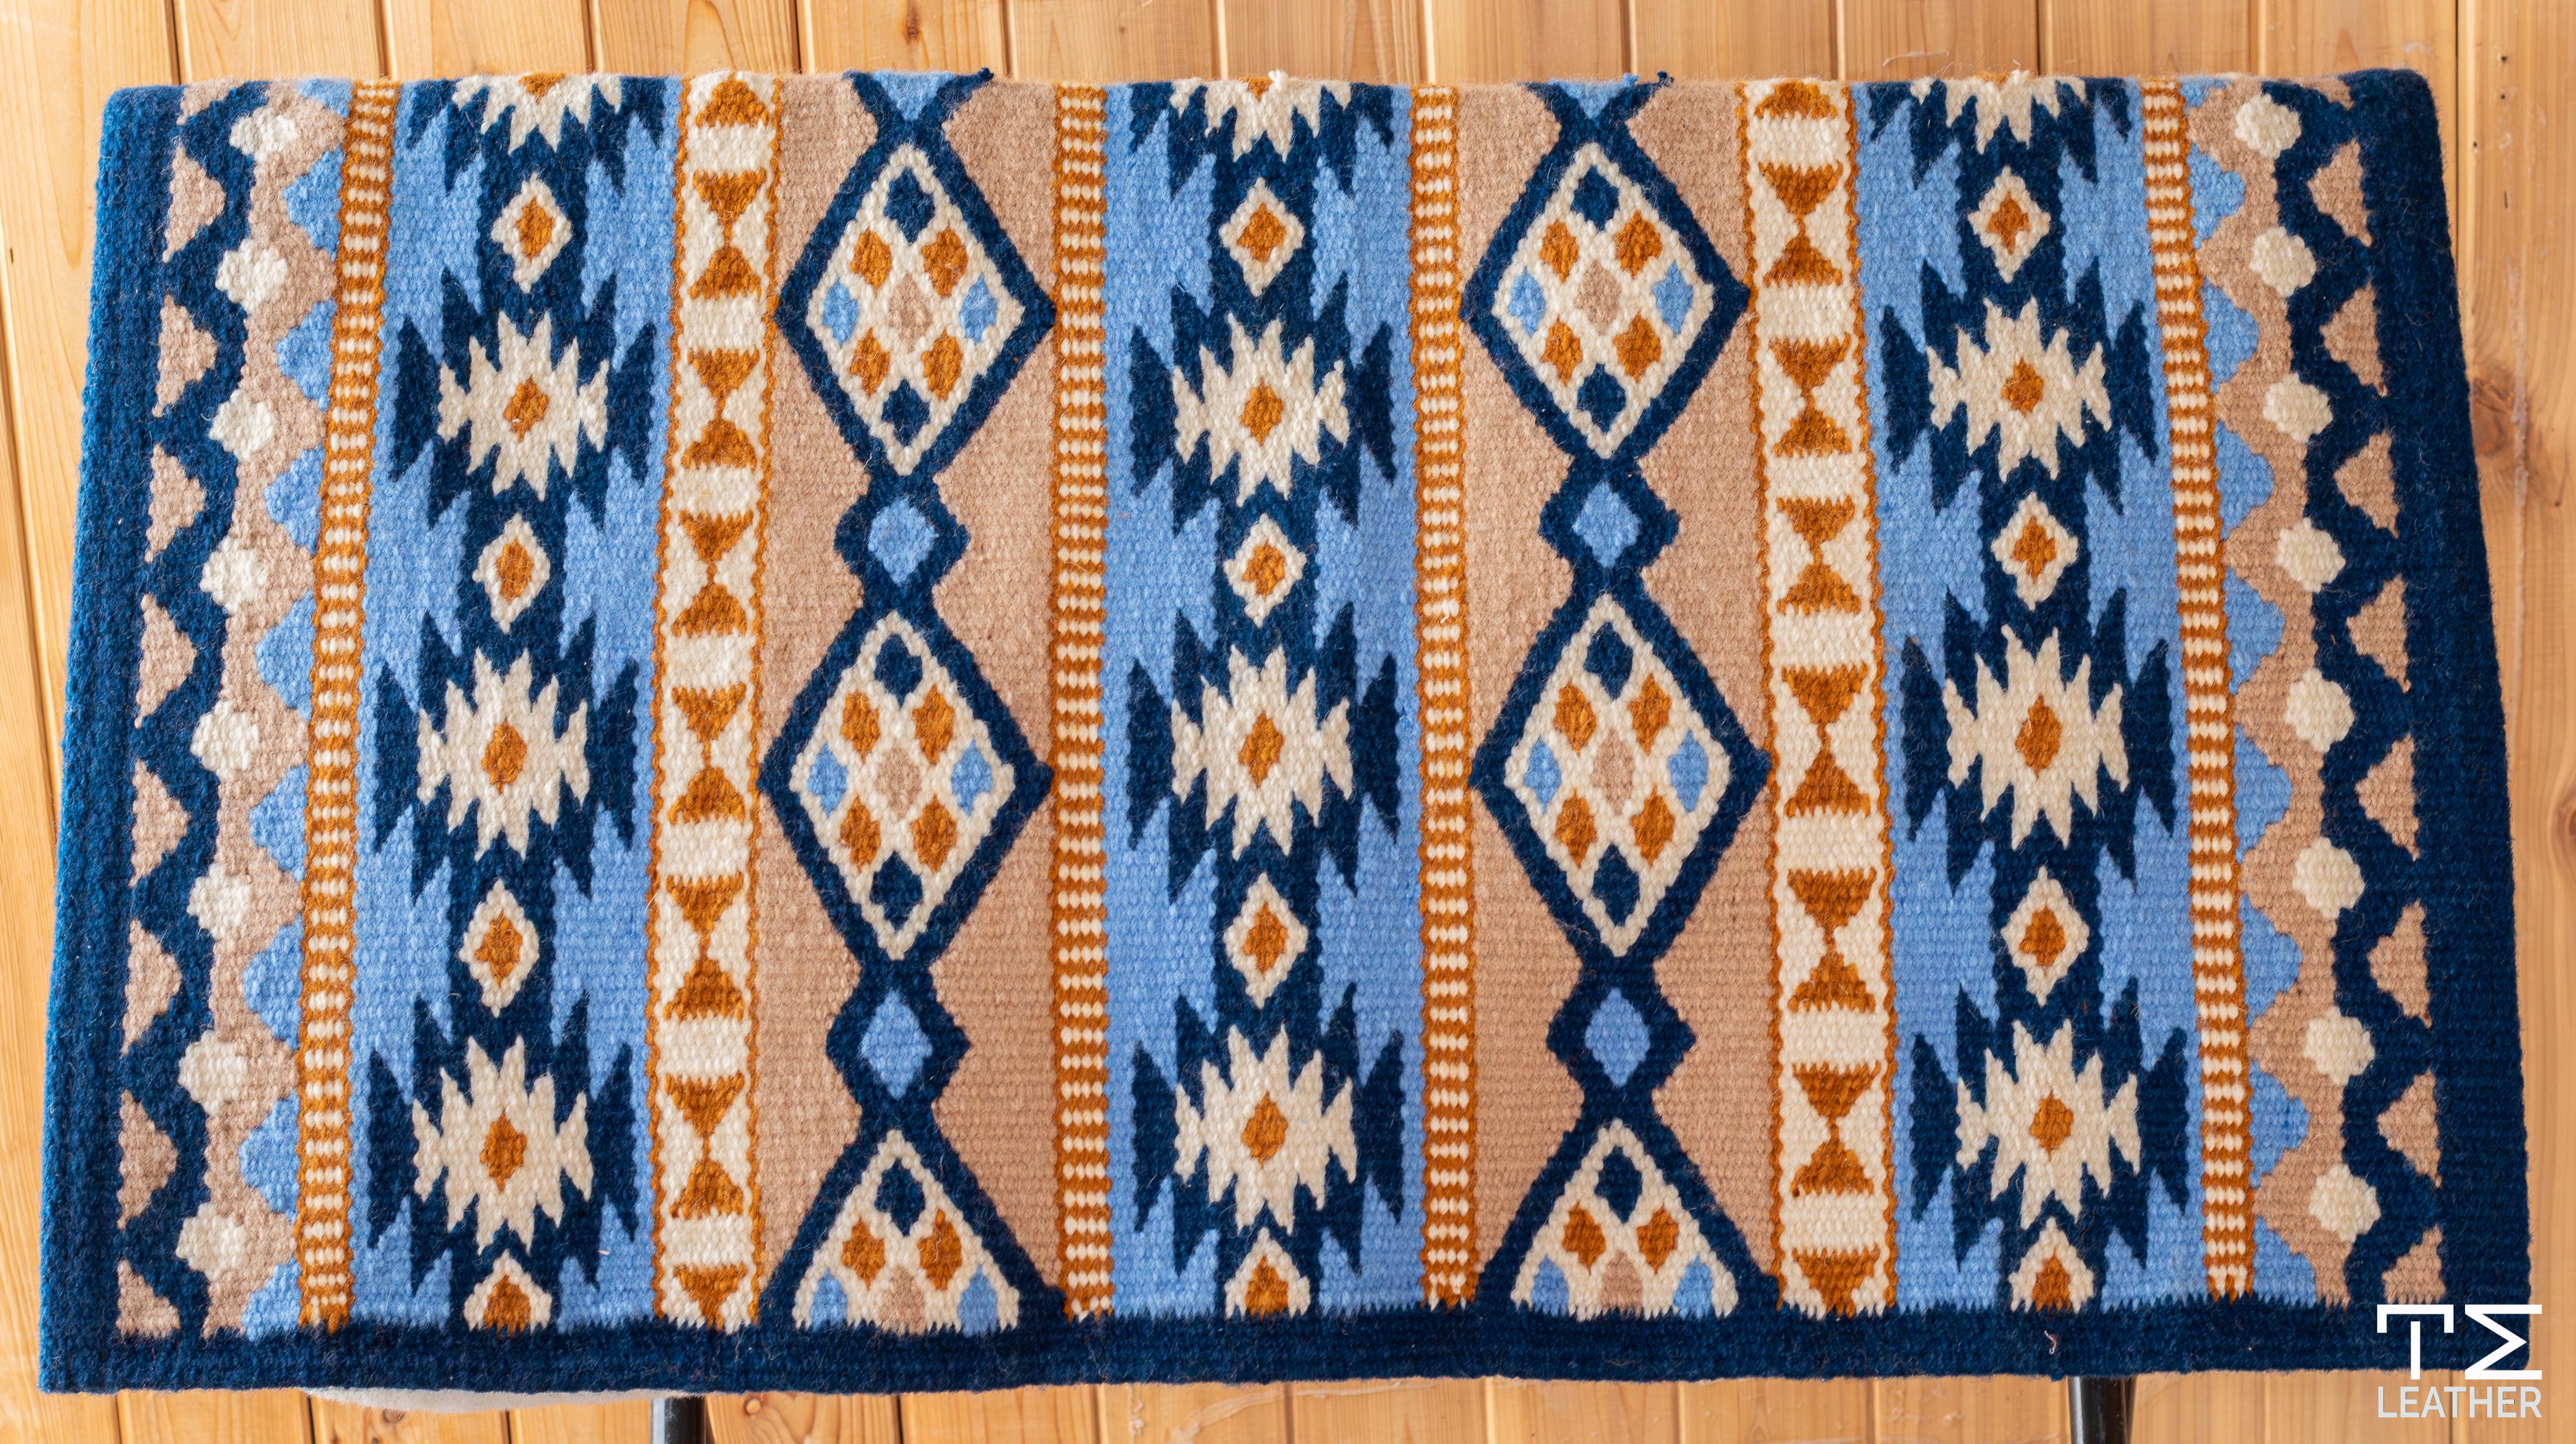 Navy, Light Blue, and Tans with Cream Accents Flat Show Blanket